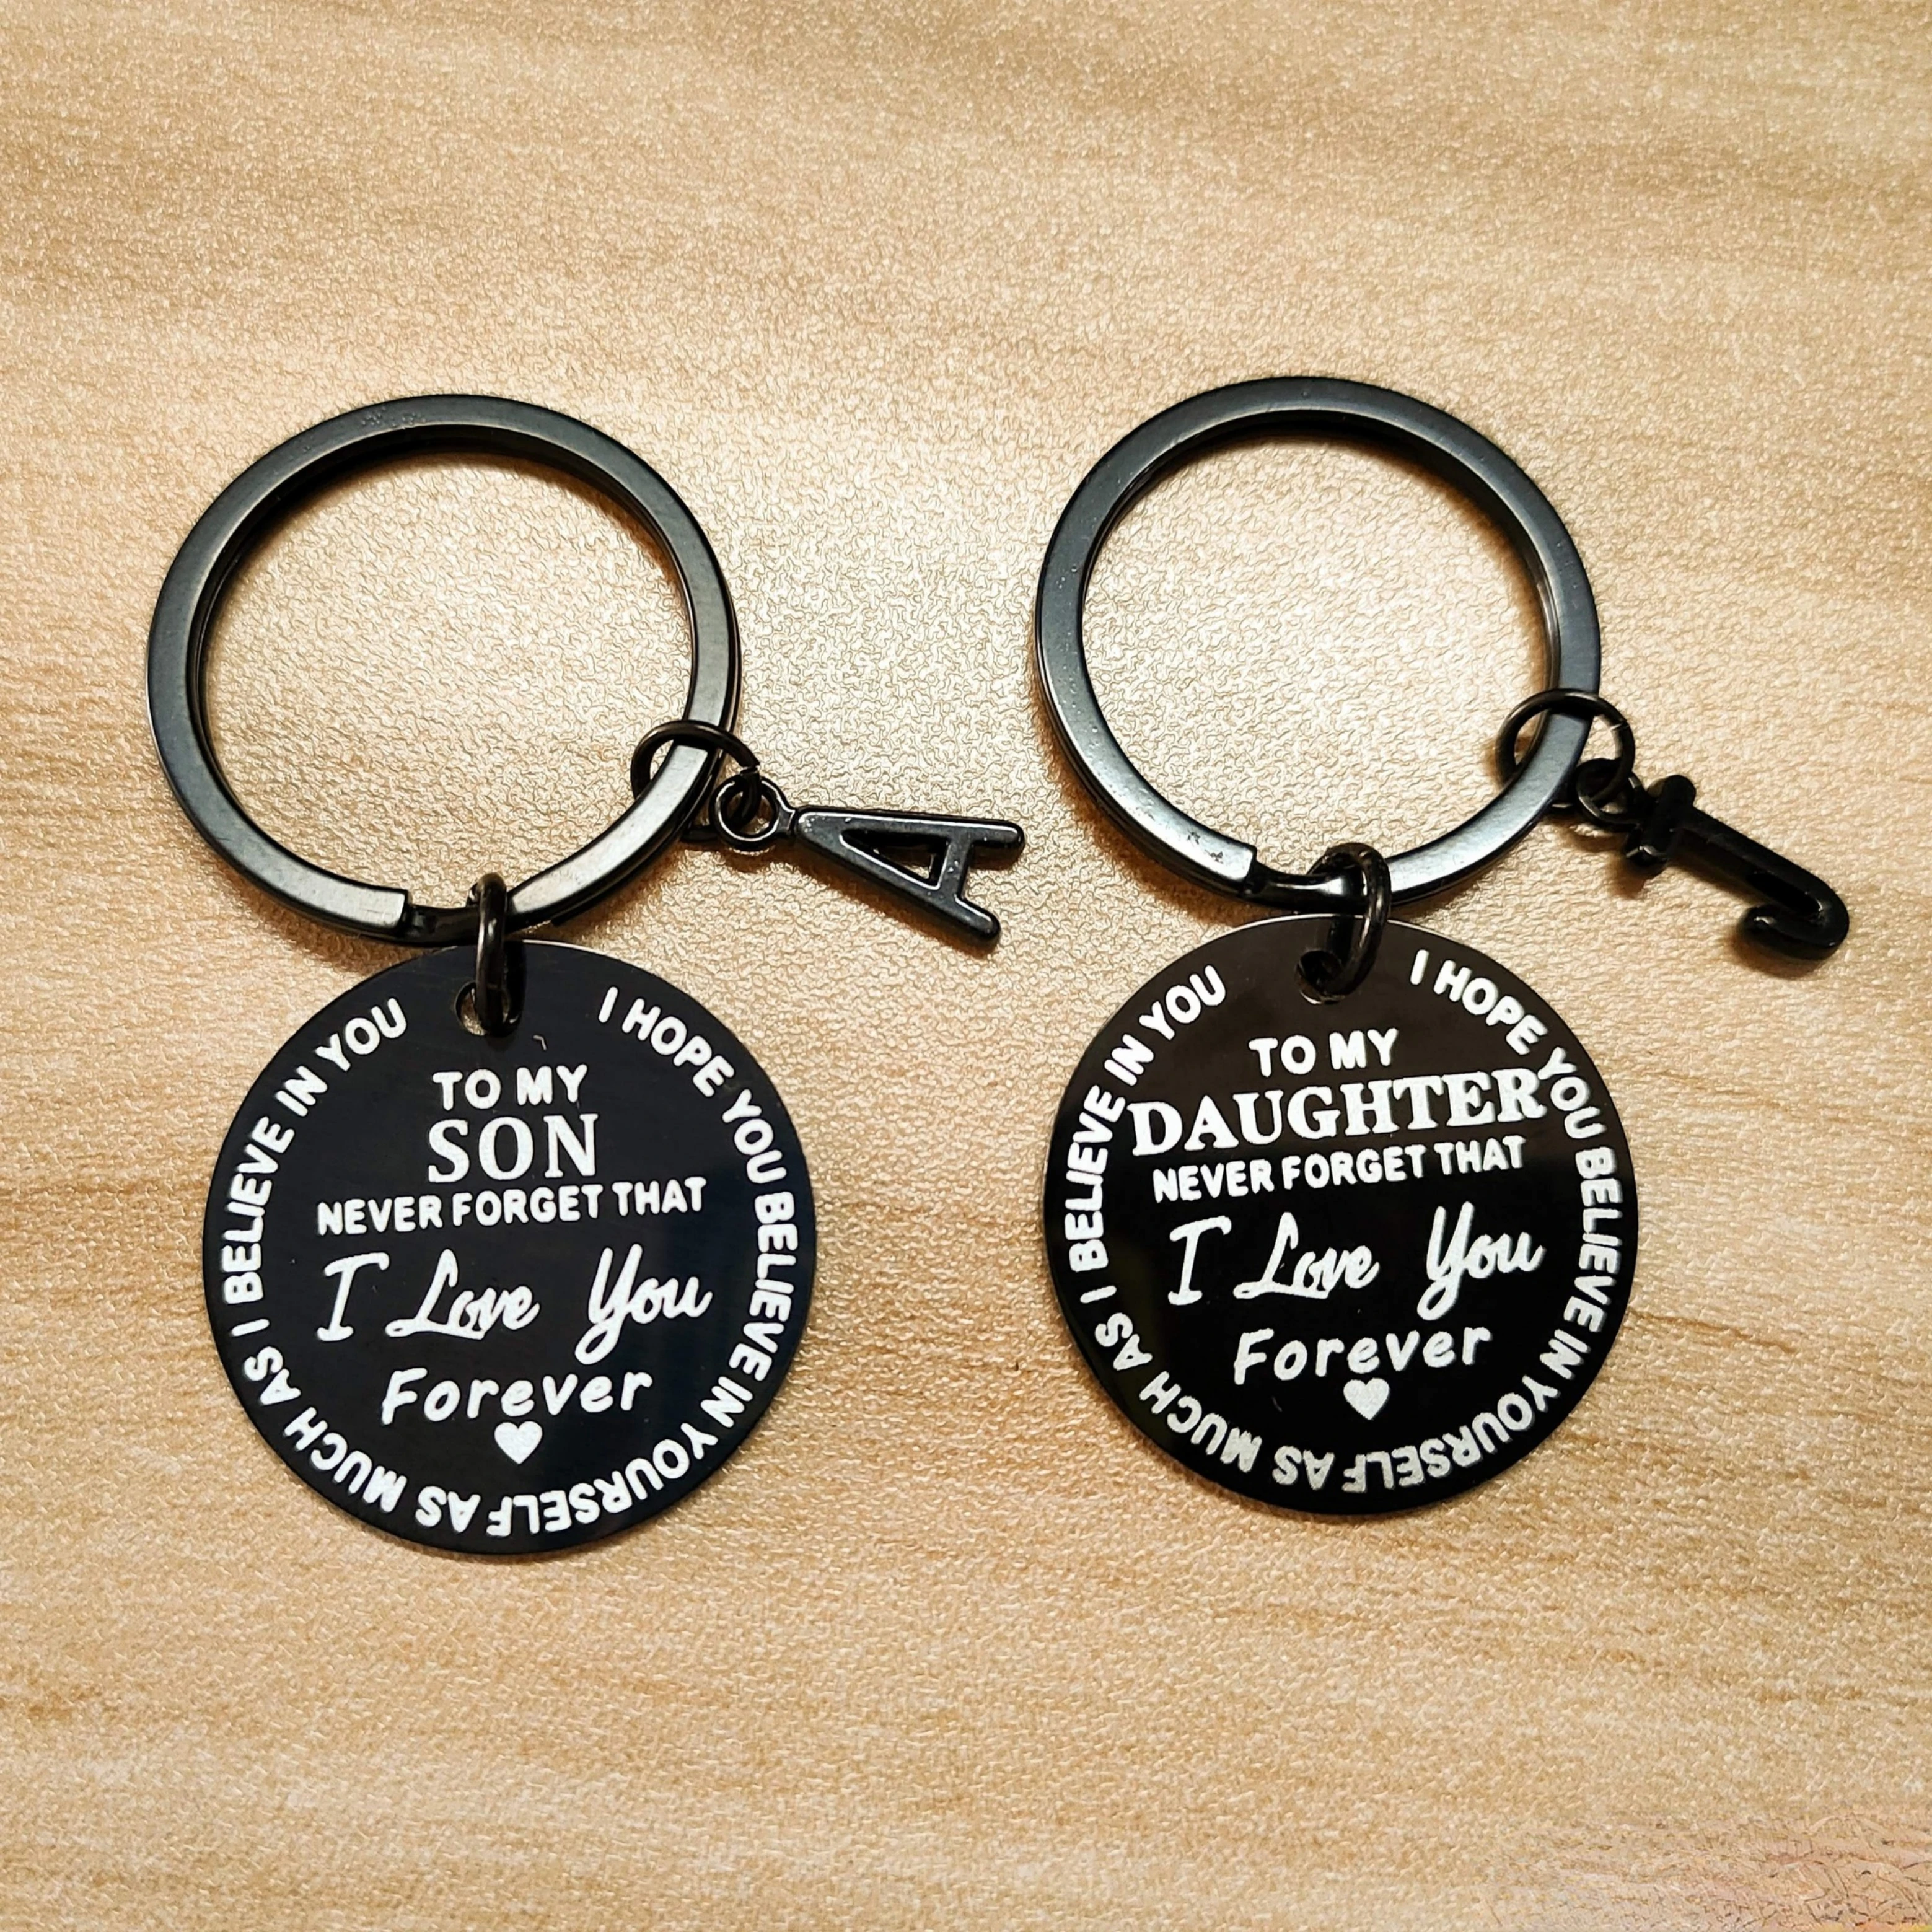 

To My Son Daughter Inspirational Gift Keychain From Dad Mom Never Forget That I Love You Forever Key Ring